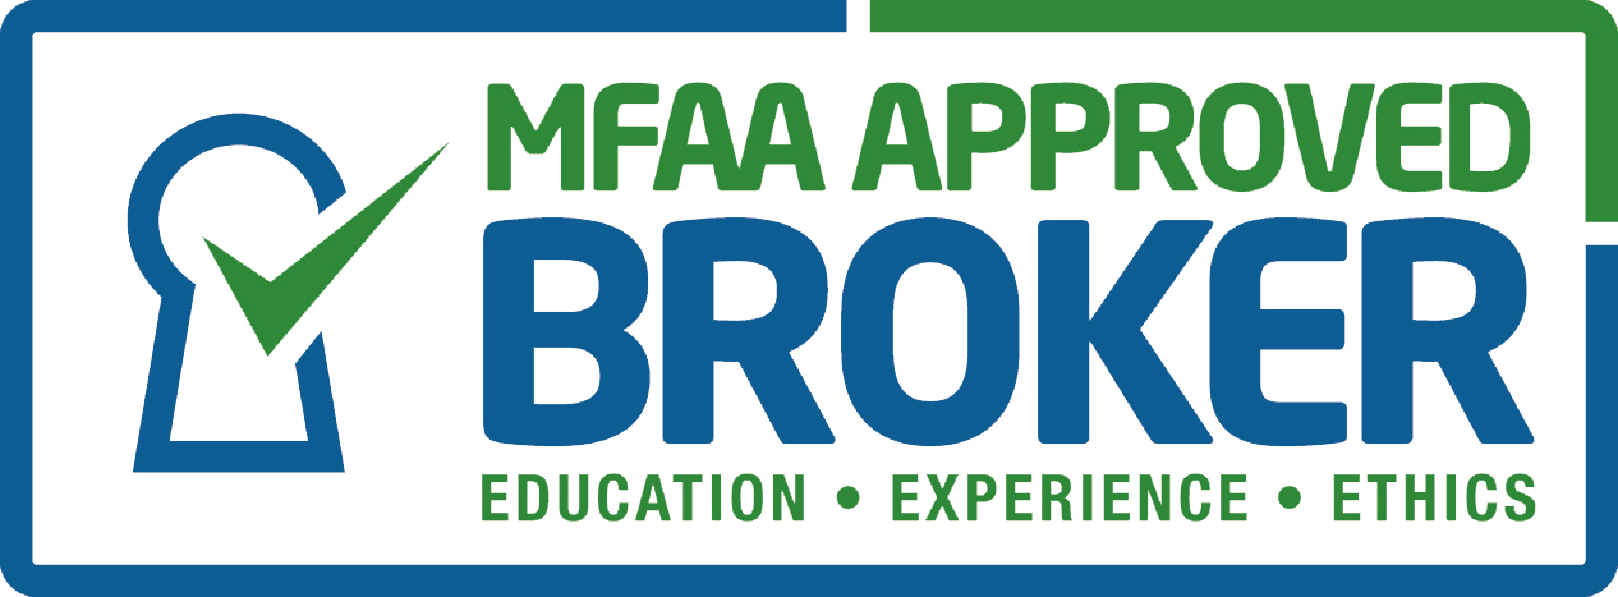 MFAA-approved-broker-logo-no-background